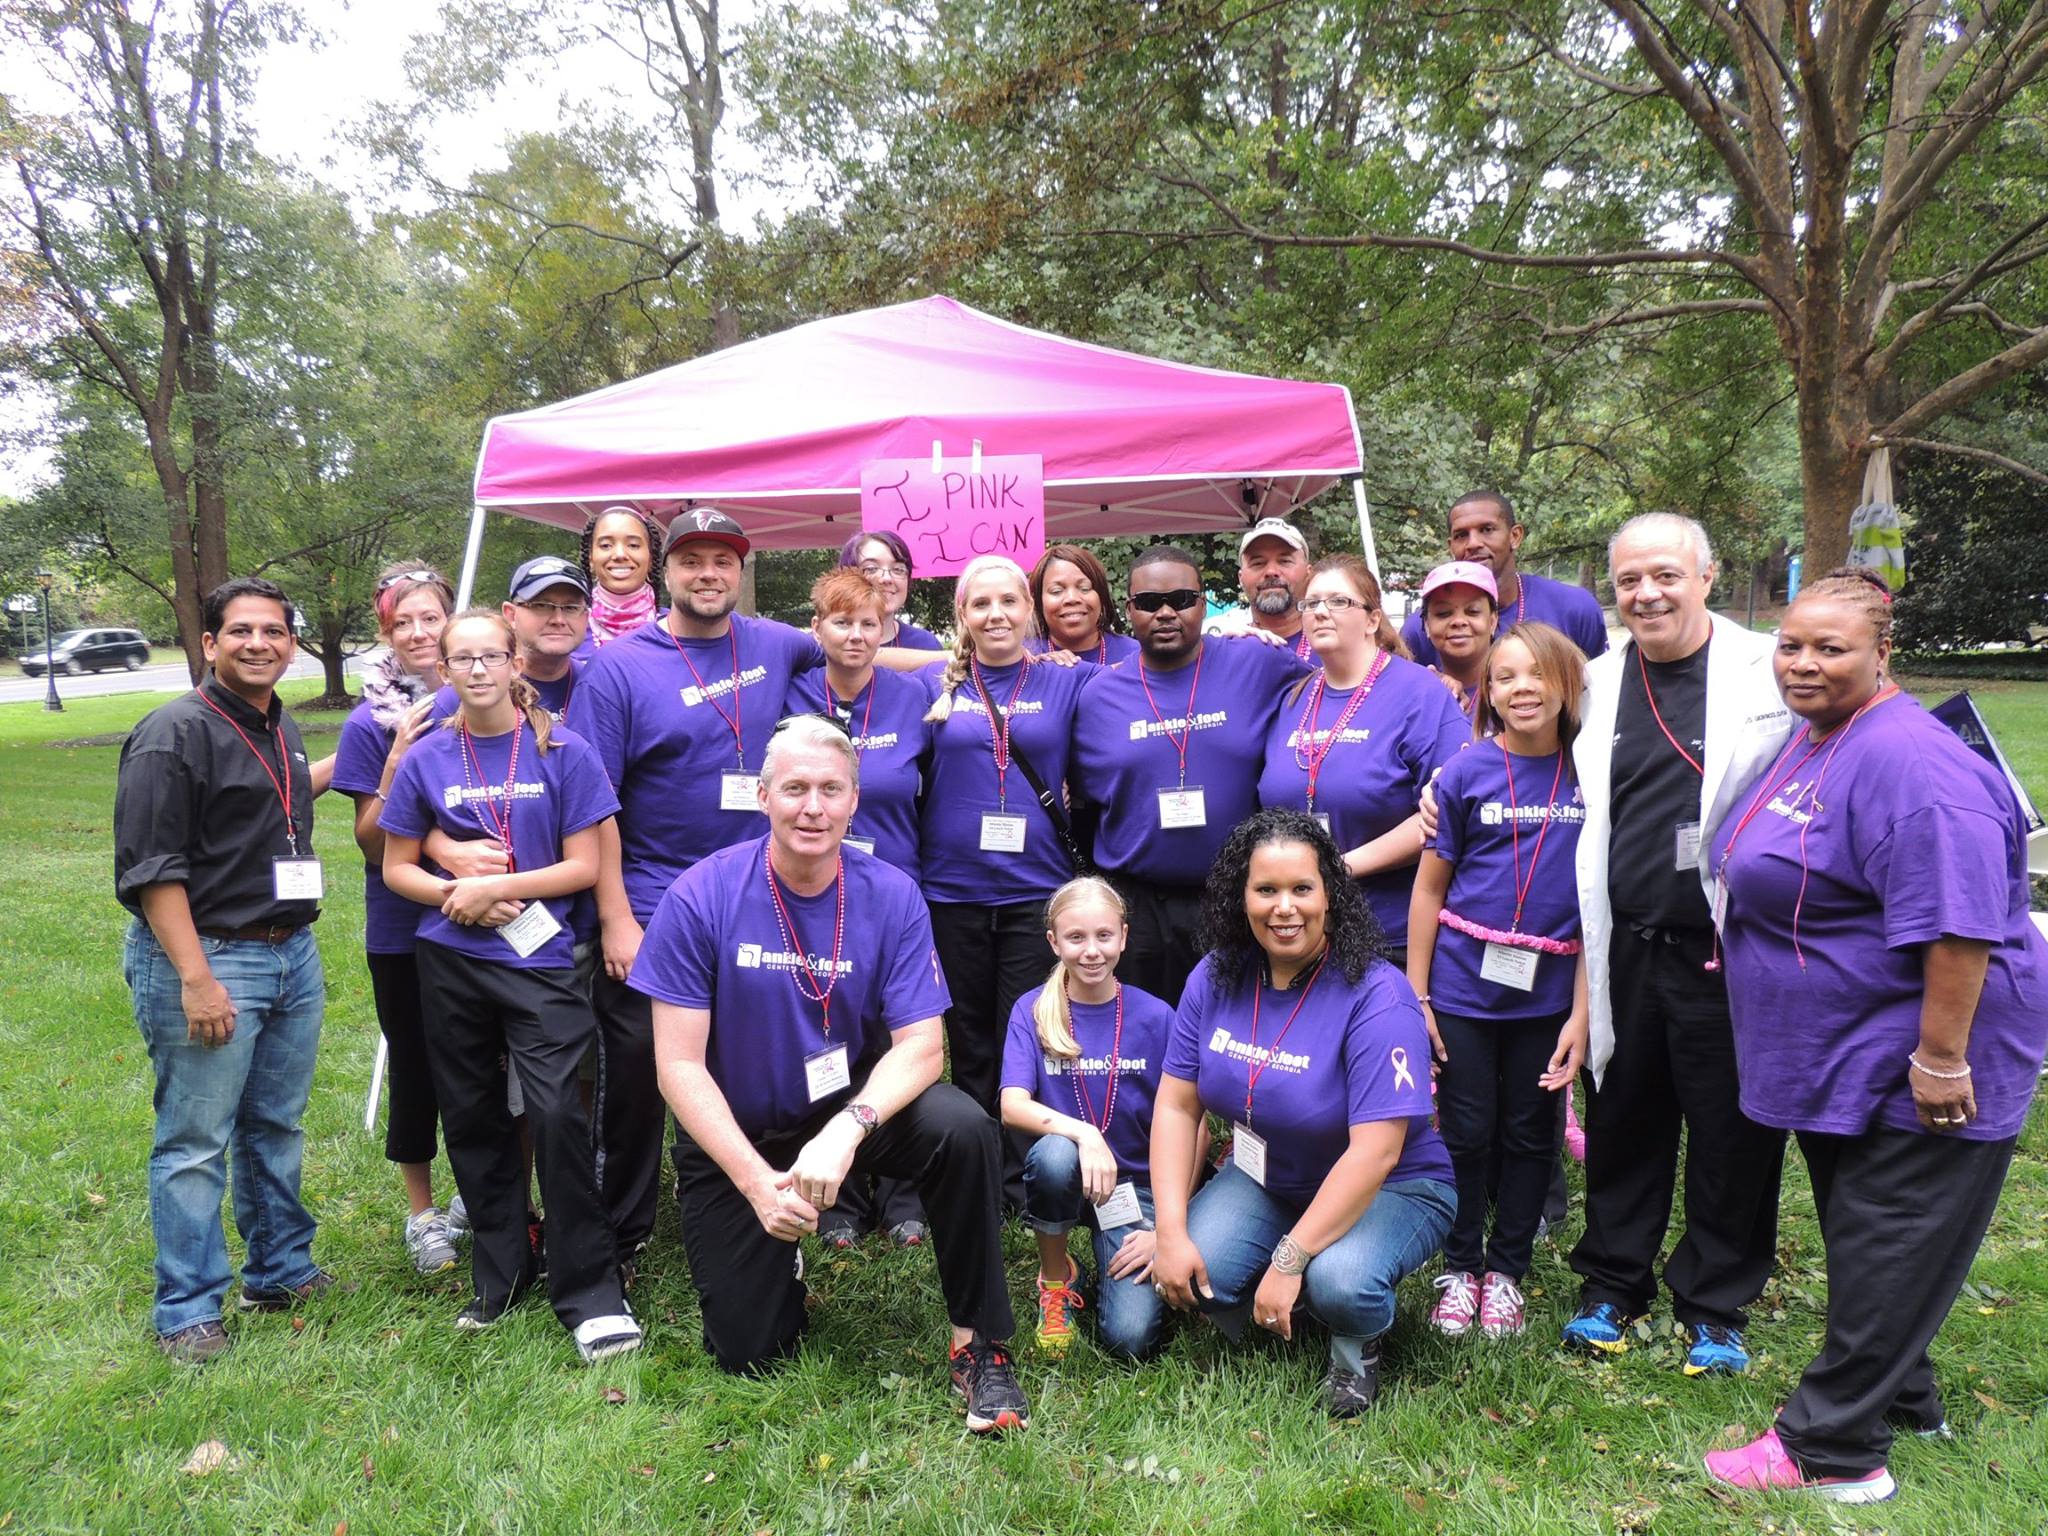 5 Tips For All Walkers Preparing For The Atlanta 2 Day Walk For Breast Cancer From Dr. Joe Giovinco